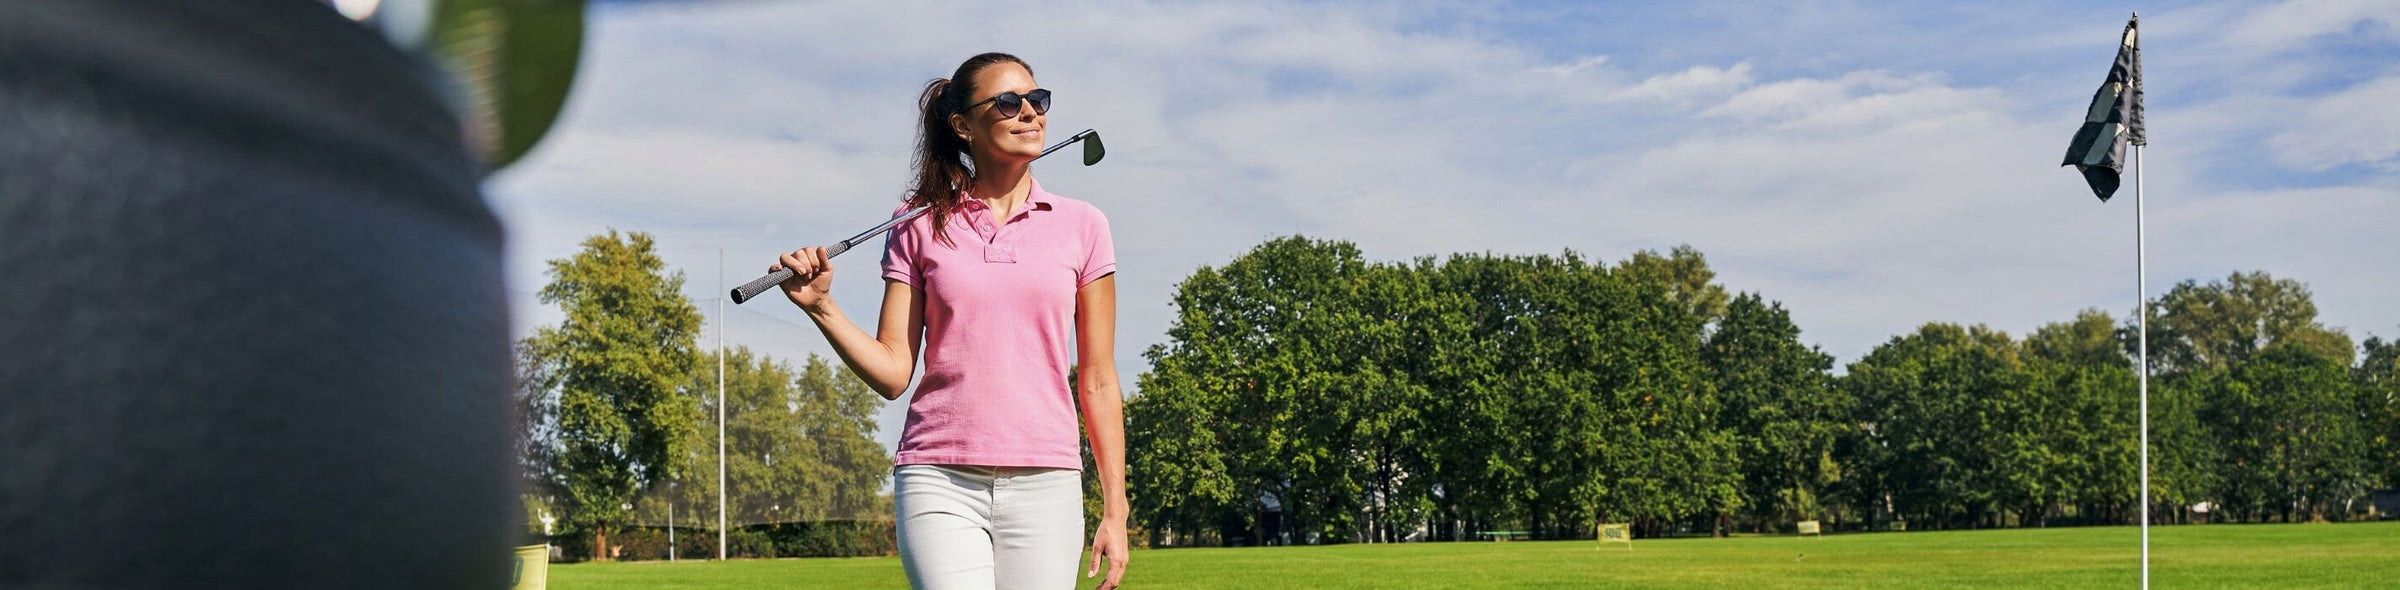 Woman on the golf course wearing pink polo shirt